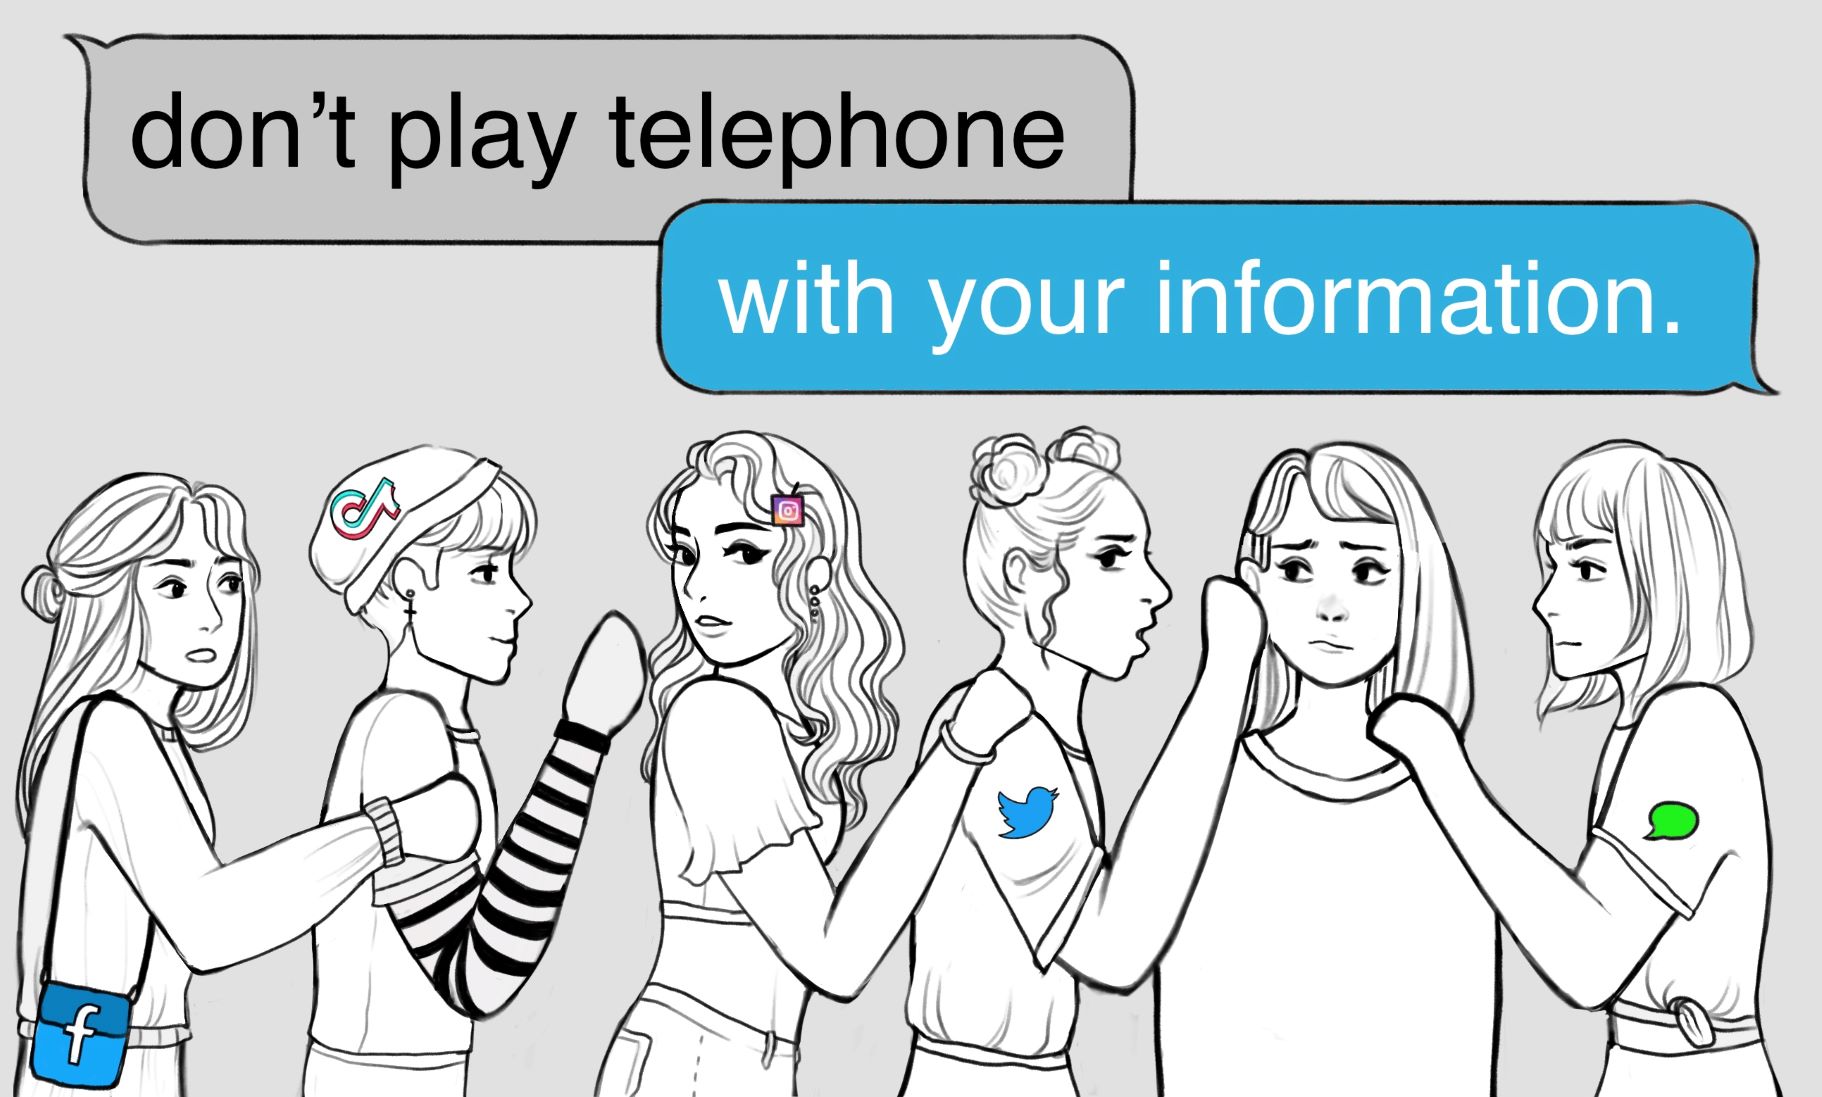 Text reads don't play telephone with your information, with image of women playing the game telephone